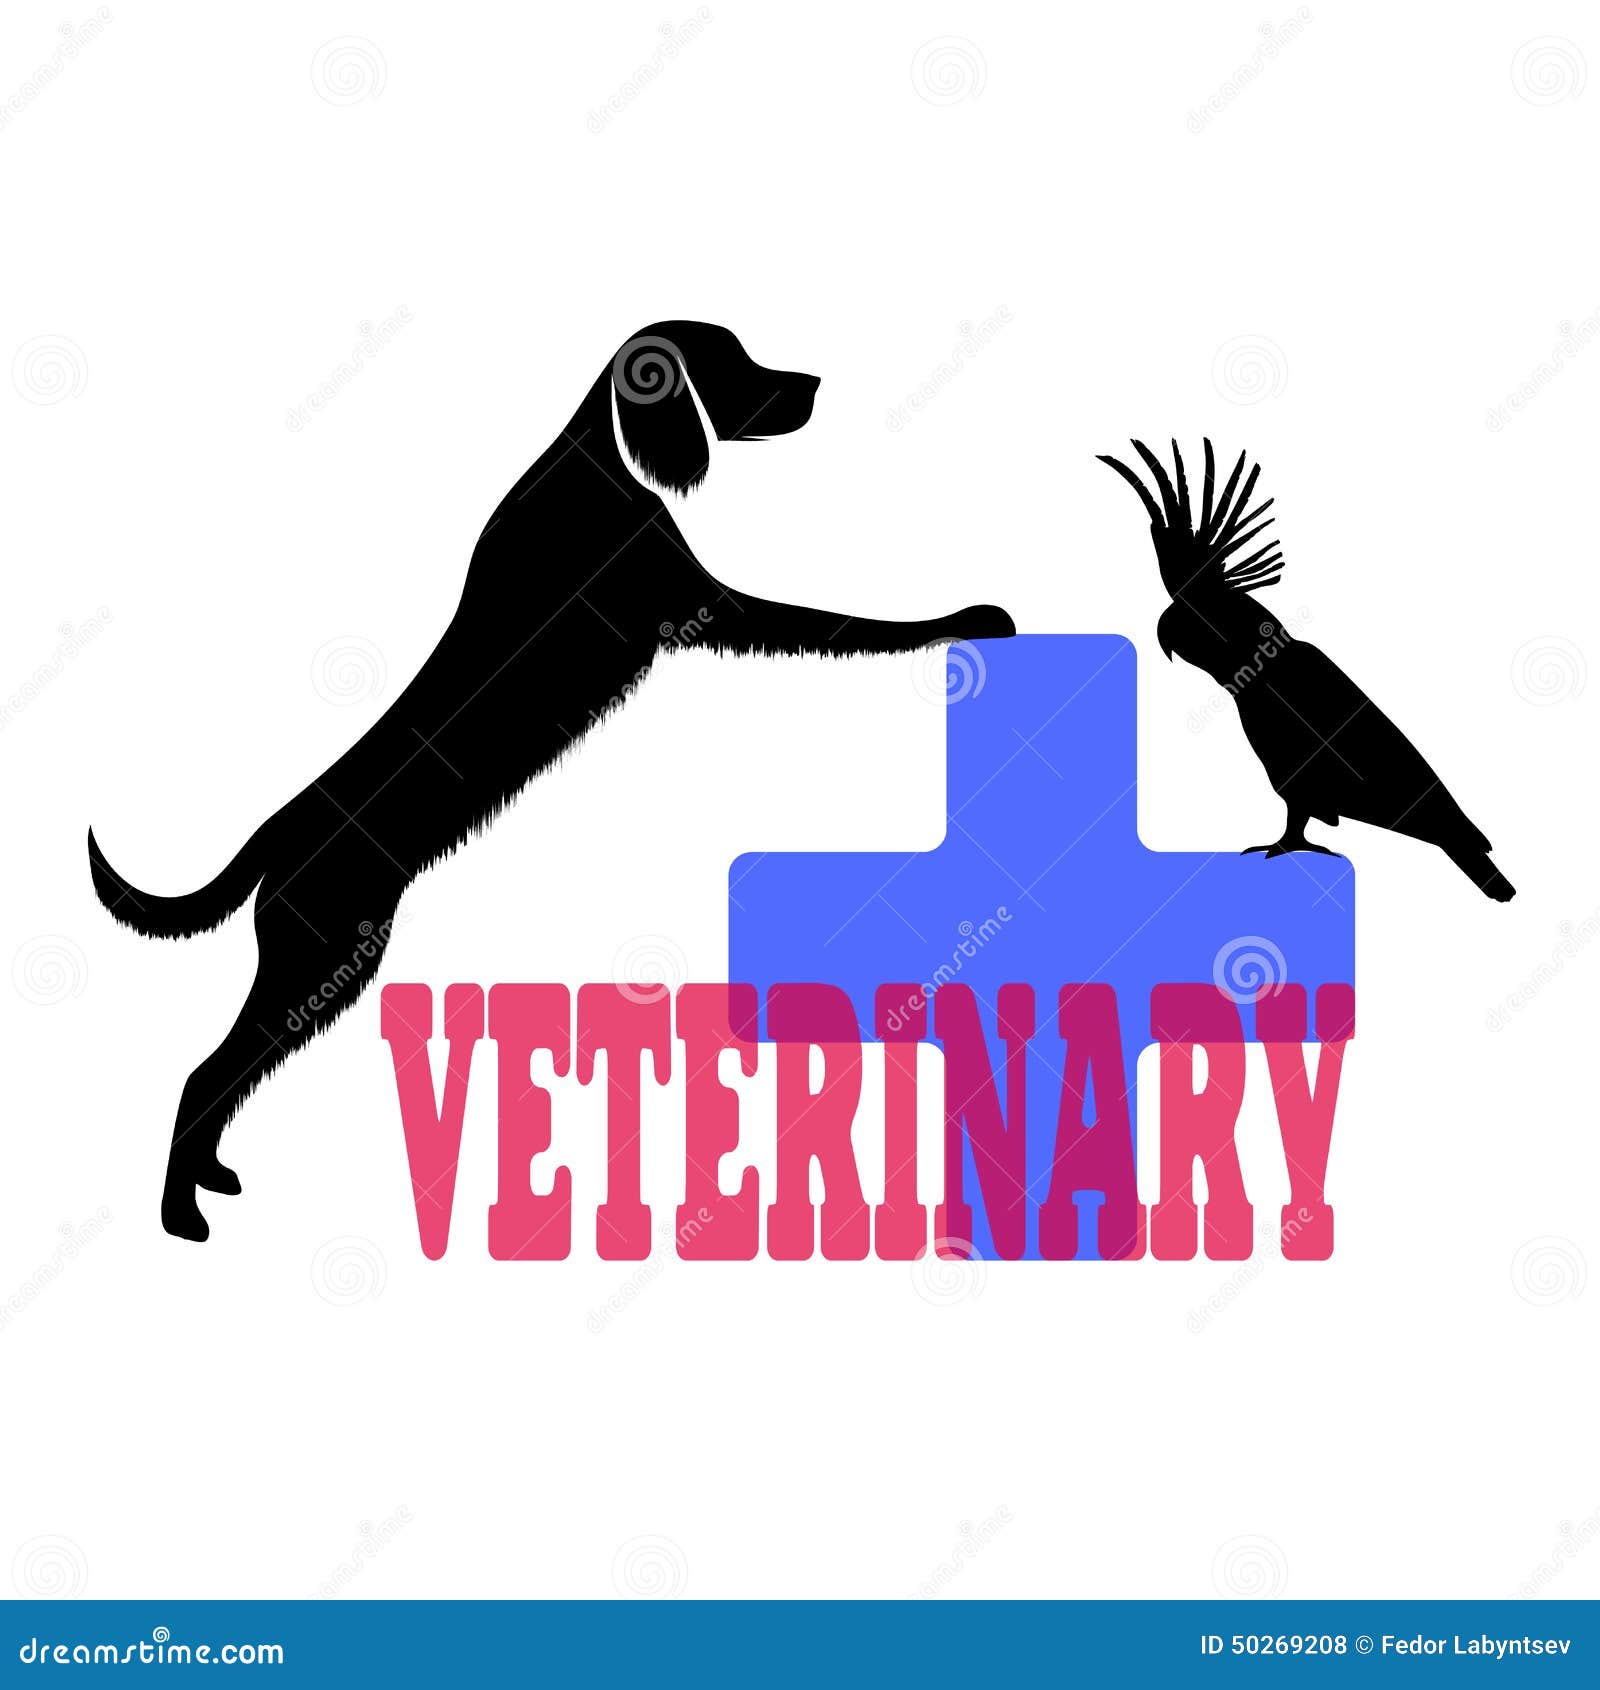 Animal House Veterinary Hospital - Veterinarian serving Arnold, Imperial  and South County - Home